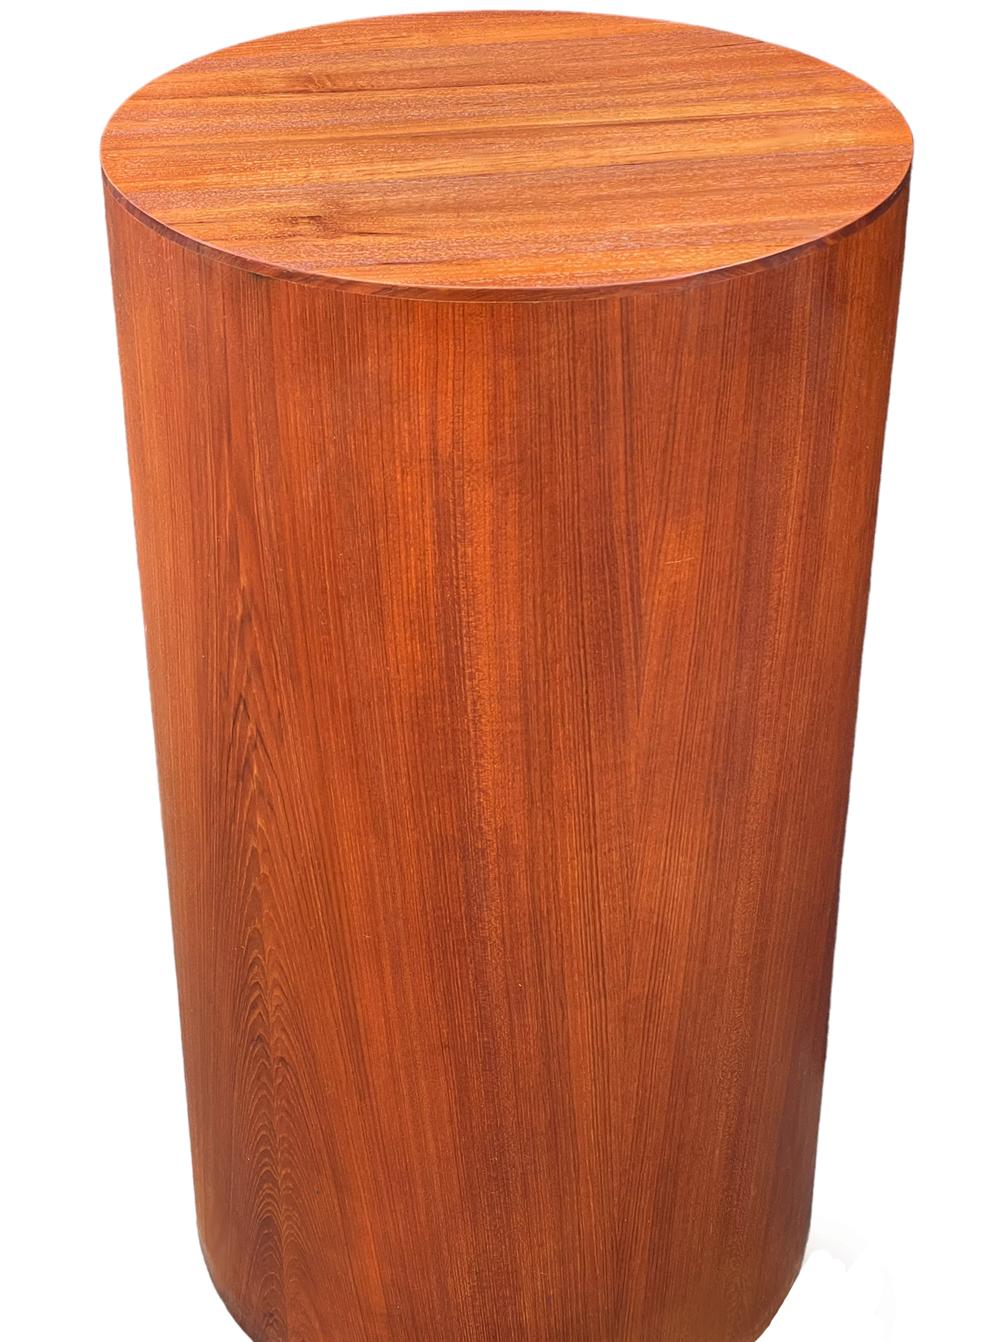 A simple clean modern pedestal table from Denmark circa 1960's. It features beautiful grained teak wood construction. Great versatile piece in very good condition. 